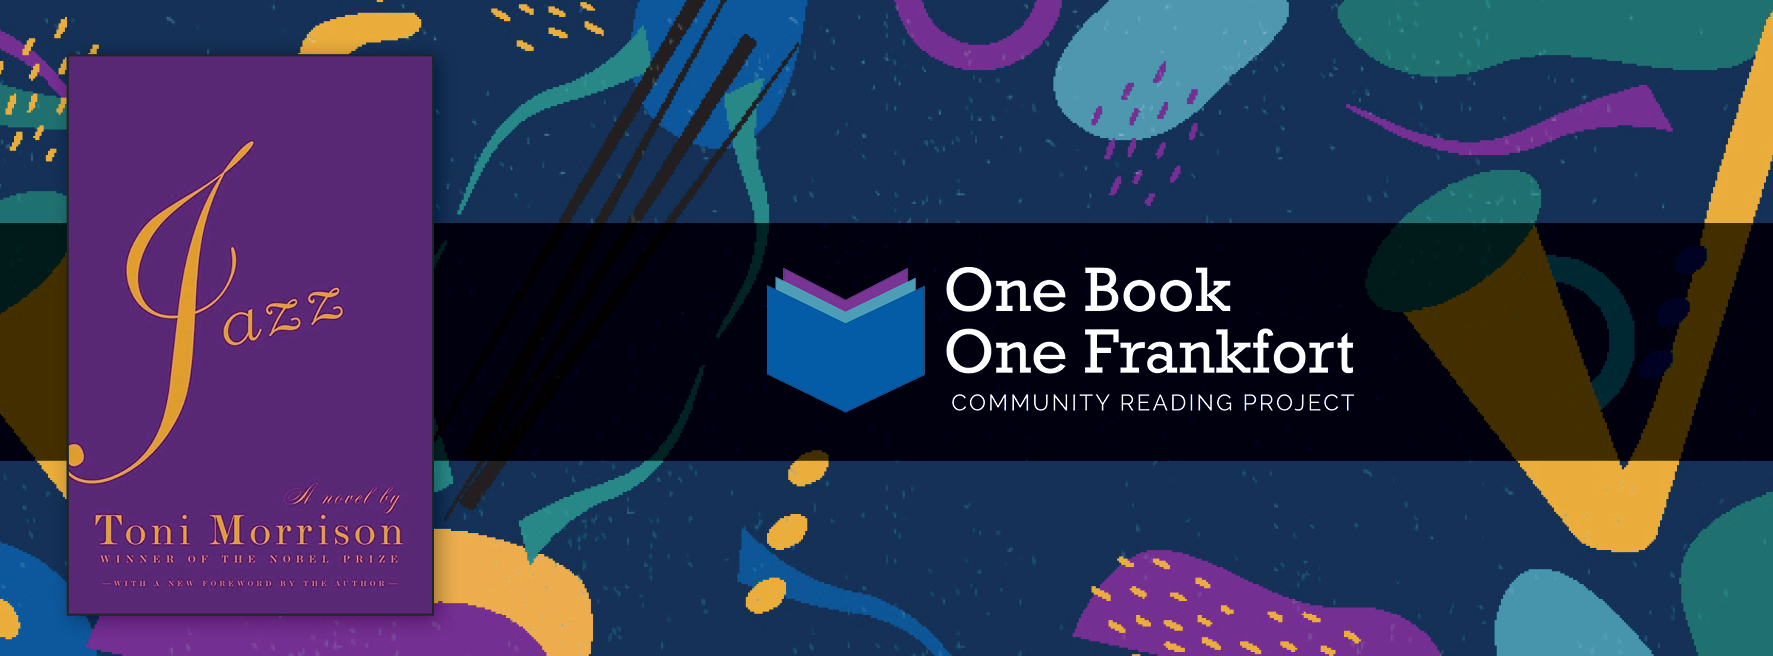 One Book One Frankfort banner - Jazz by Toni Morrison